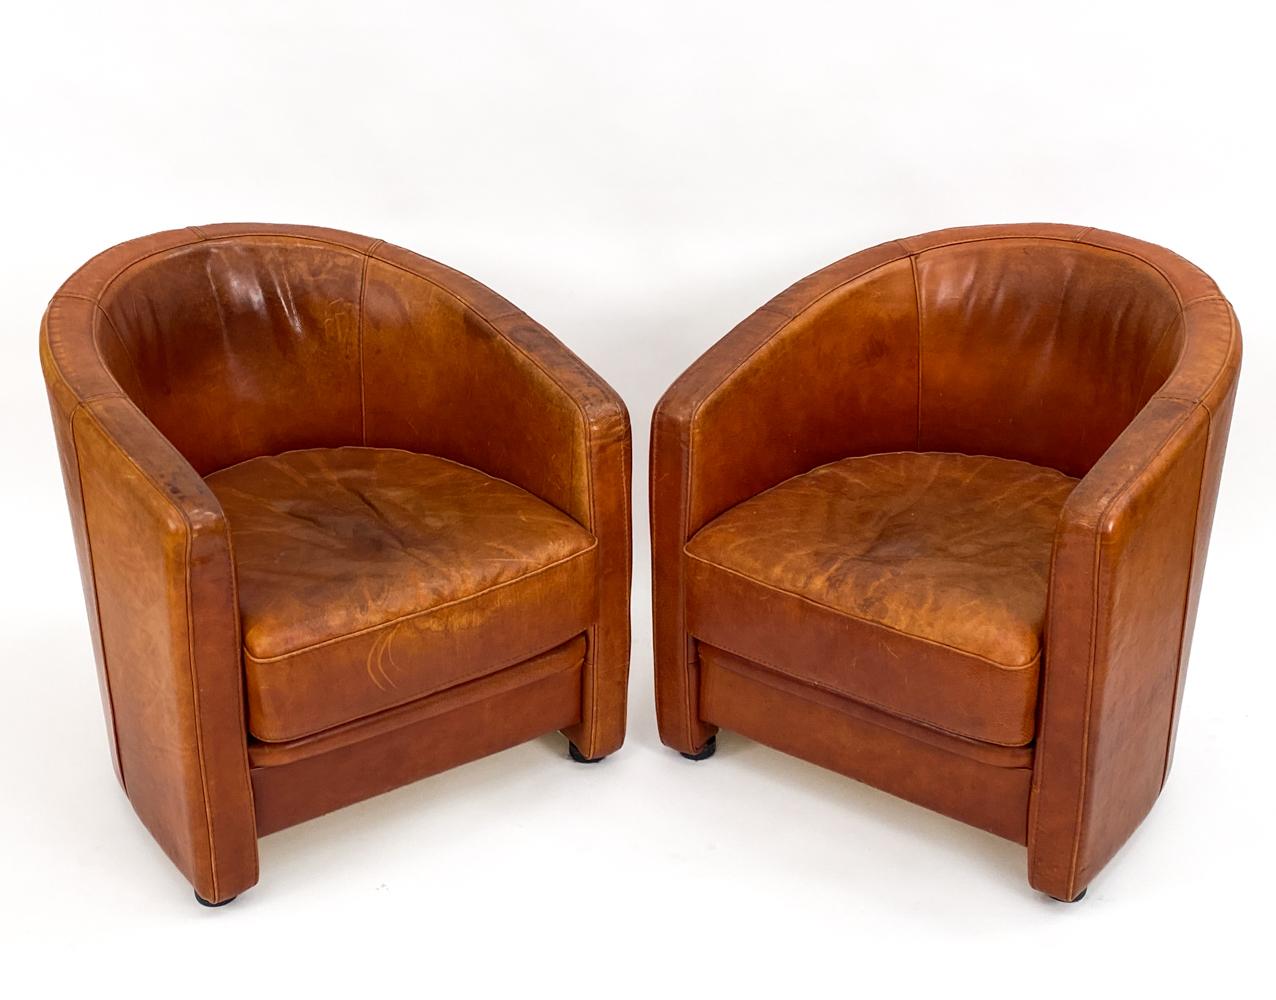 Add a touch of handsome luxury to your library or sitting room with this timeless pair of leather club chairs attributed to Anton Dam. These chairs have a great Art Deco look, with boldly curved barrel backs, clean lines and proportions that are